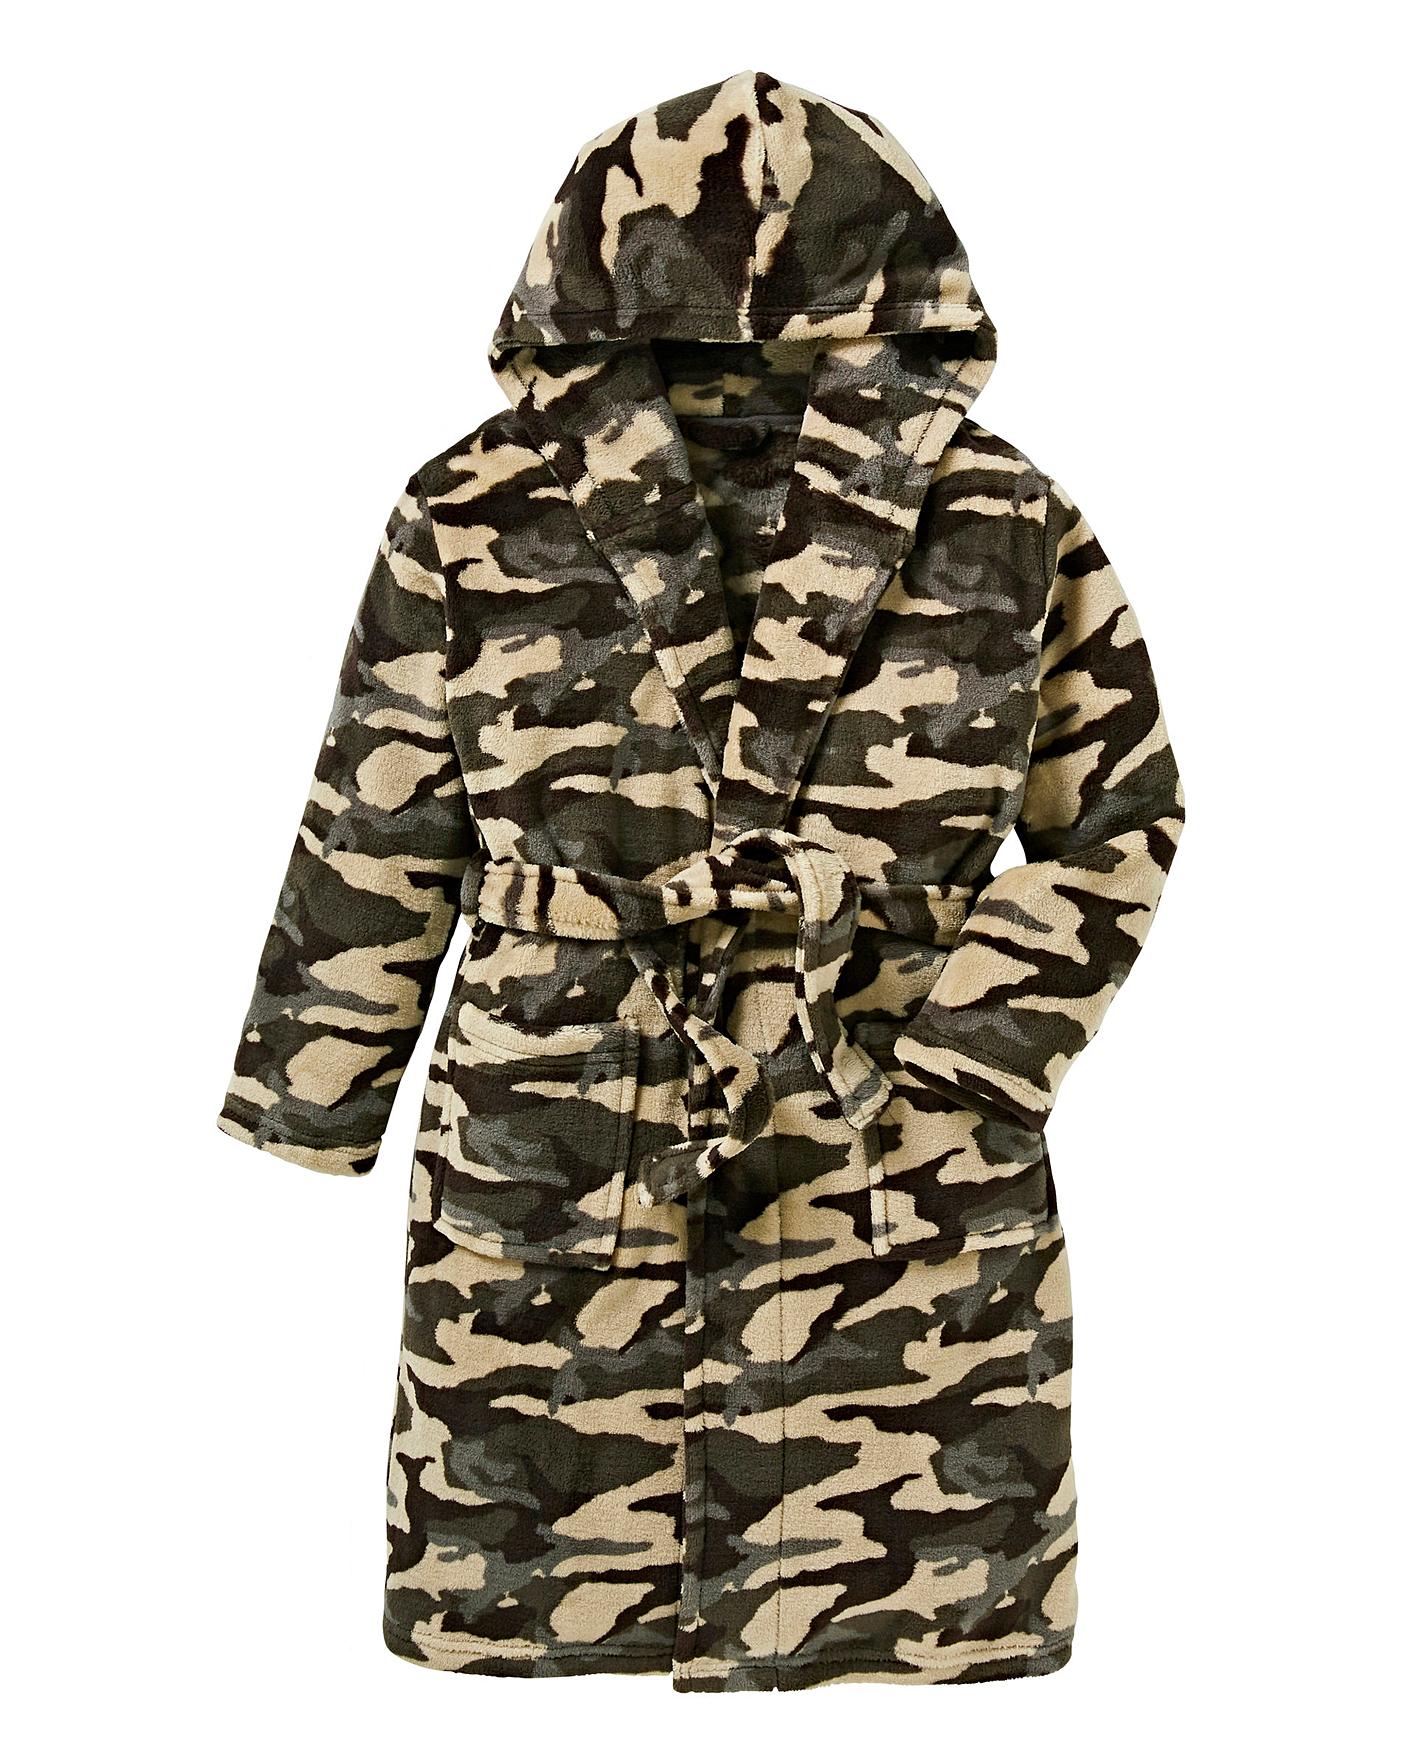 KD Boys Camouflage Dressing Gown | Crazy Clearance